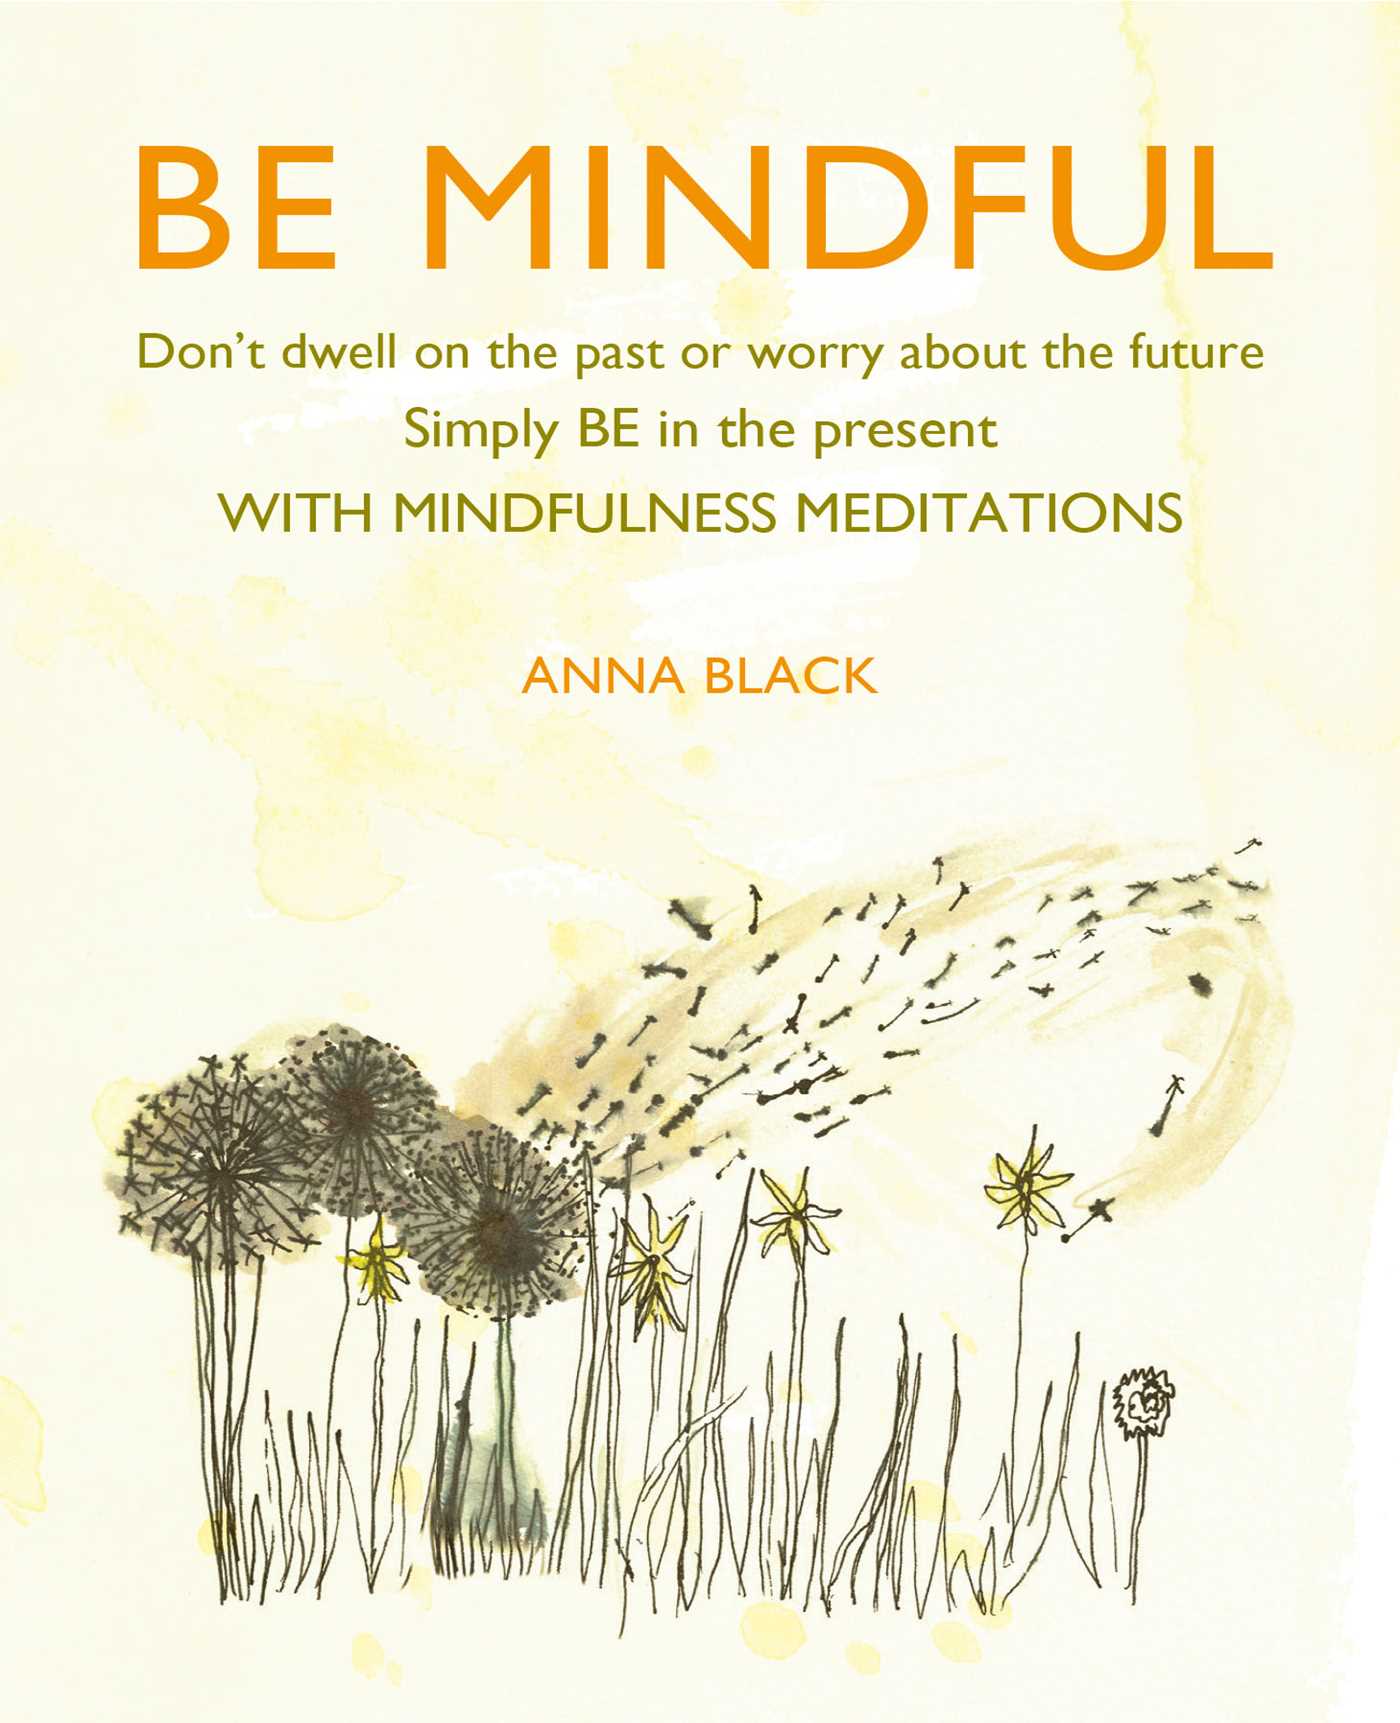 Be Mindful : Don't dwell on the past or worry about the future, simply BE in the present with mindfulness meditations